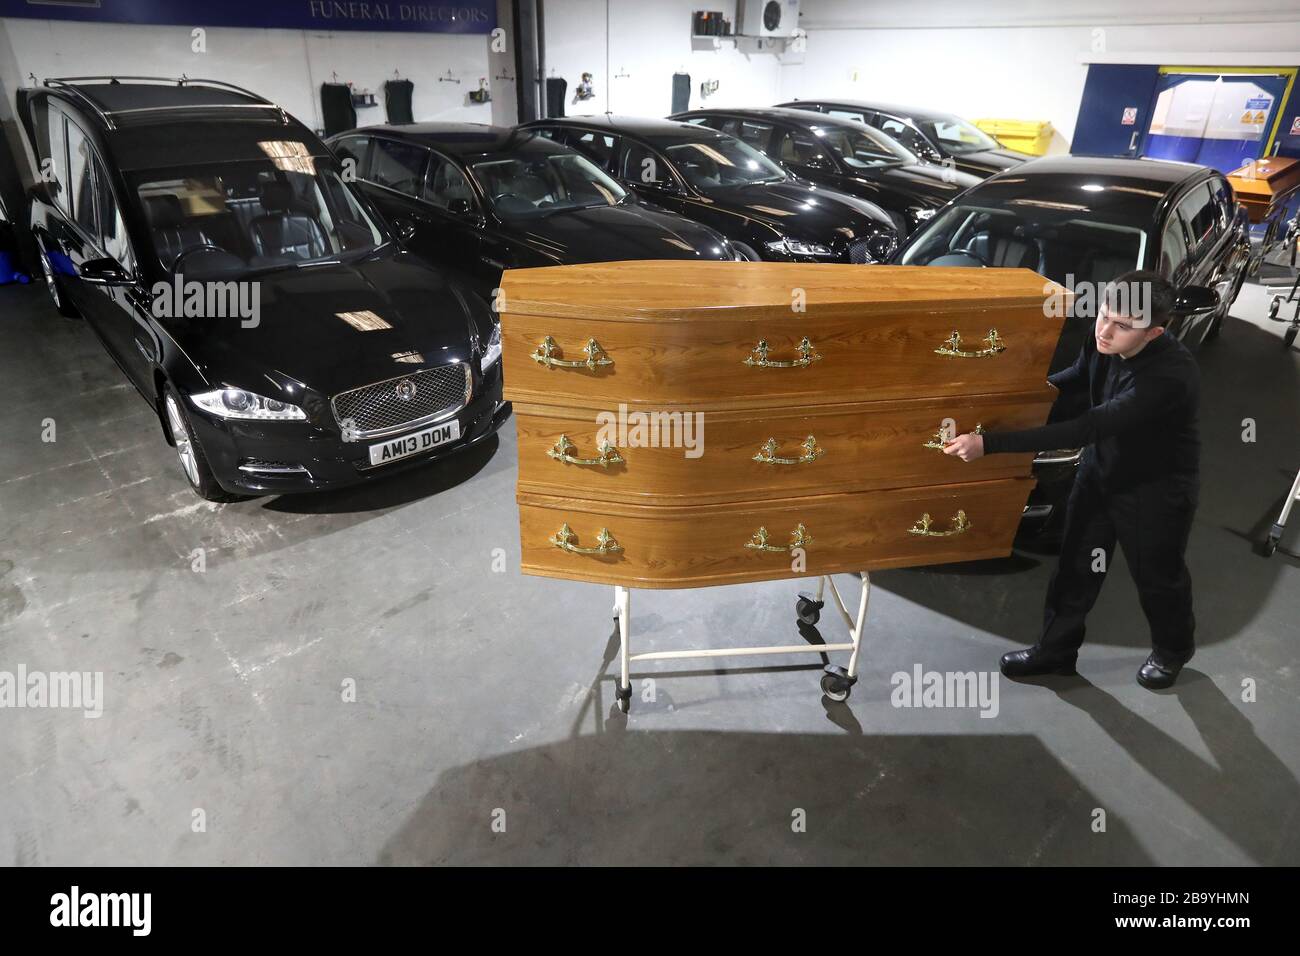 Declan Harley from Anderson Maguire Funeral Directors moves empty coffins at their offices in Glasgow. Funeral directors in Scotland's largest city are facing a backlog and on the verge of running out of mortuary space, the head of one family firm has said. Funerals are unable to take place until deaths have been registered and face-to-face appointments at registry offices are unavailable following coronavirus guidance. Stock Photo